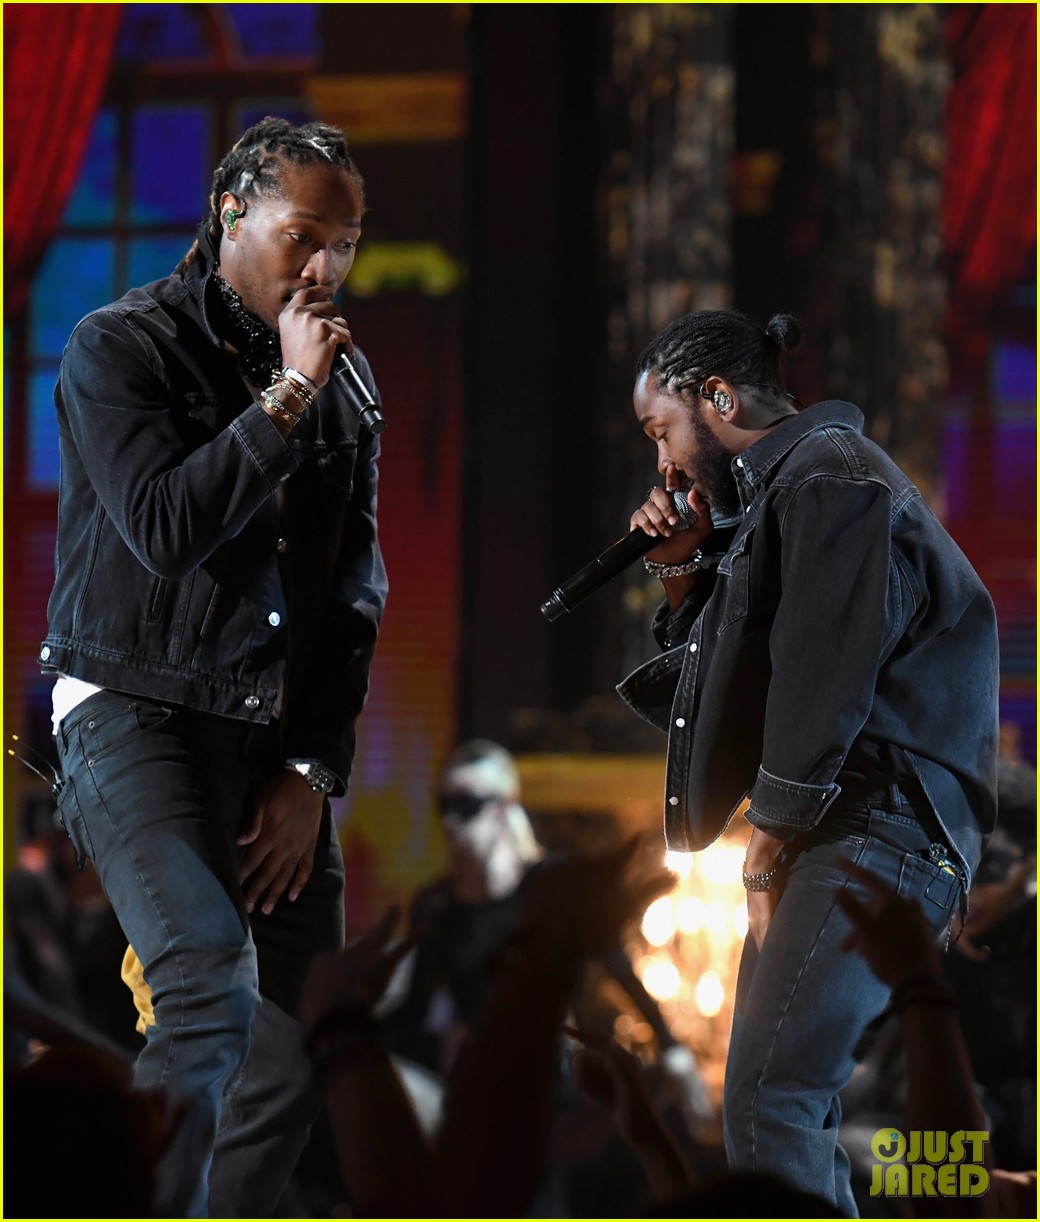 output schotel Persoon belast met sportgame Future & Kendrick Lamar Perform 'Mask Off' at BET Awards 2017 - Watch Now!:  Photo 3919839 | 2017 BET Awards, BET Awards, Future, Kendrick Lamar, Video  Photos | Just Jared: Entertainment News